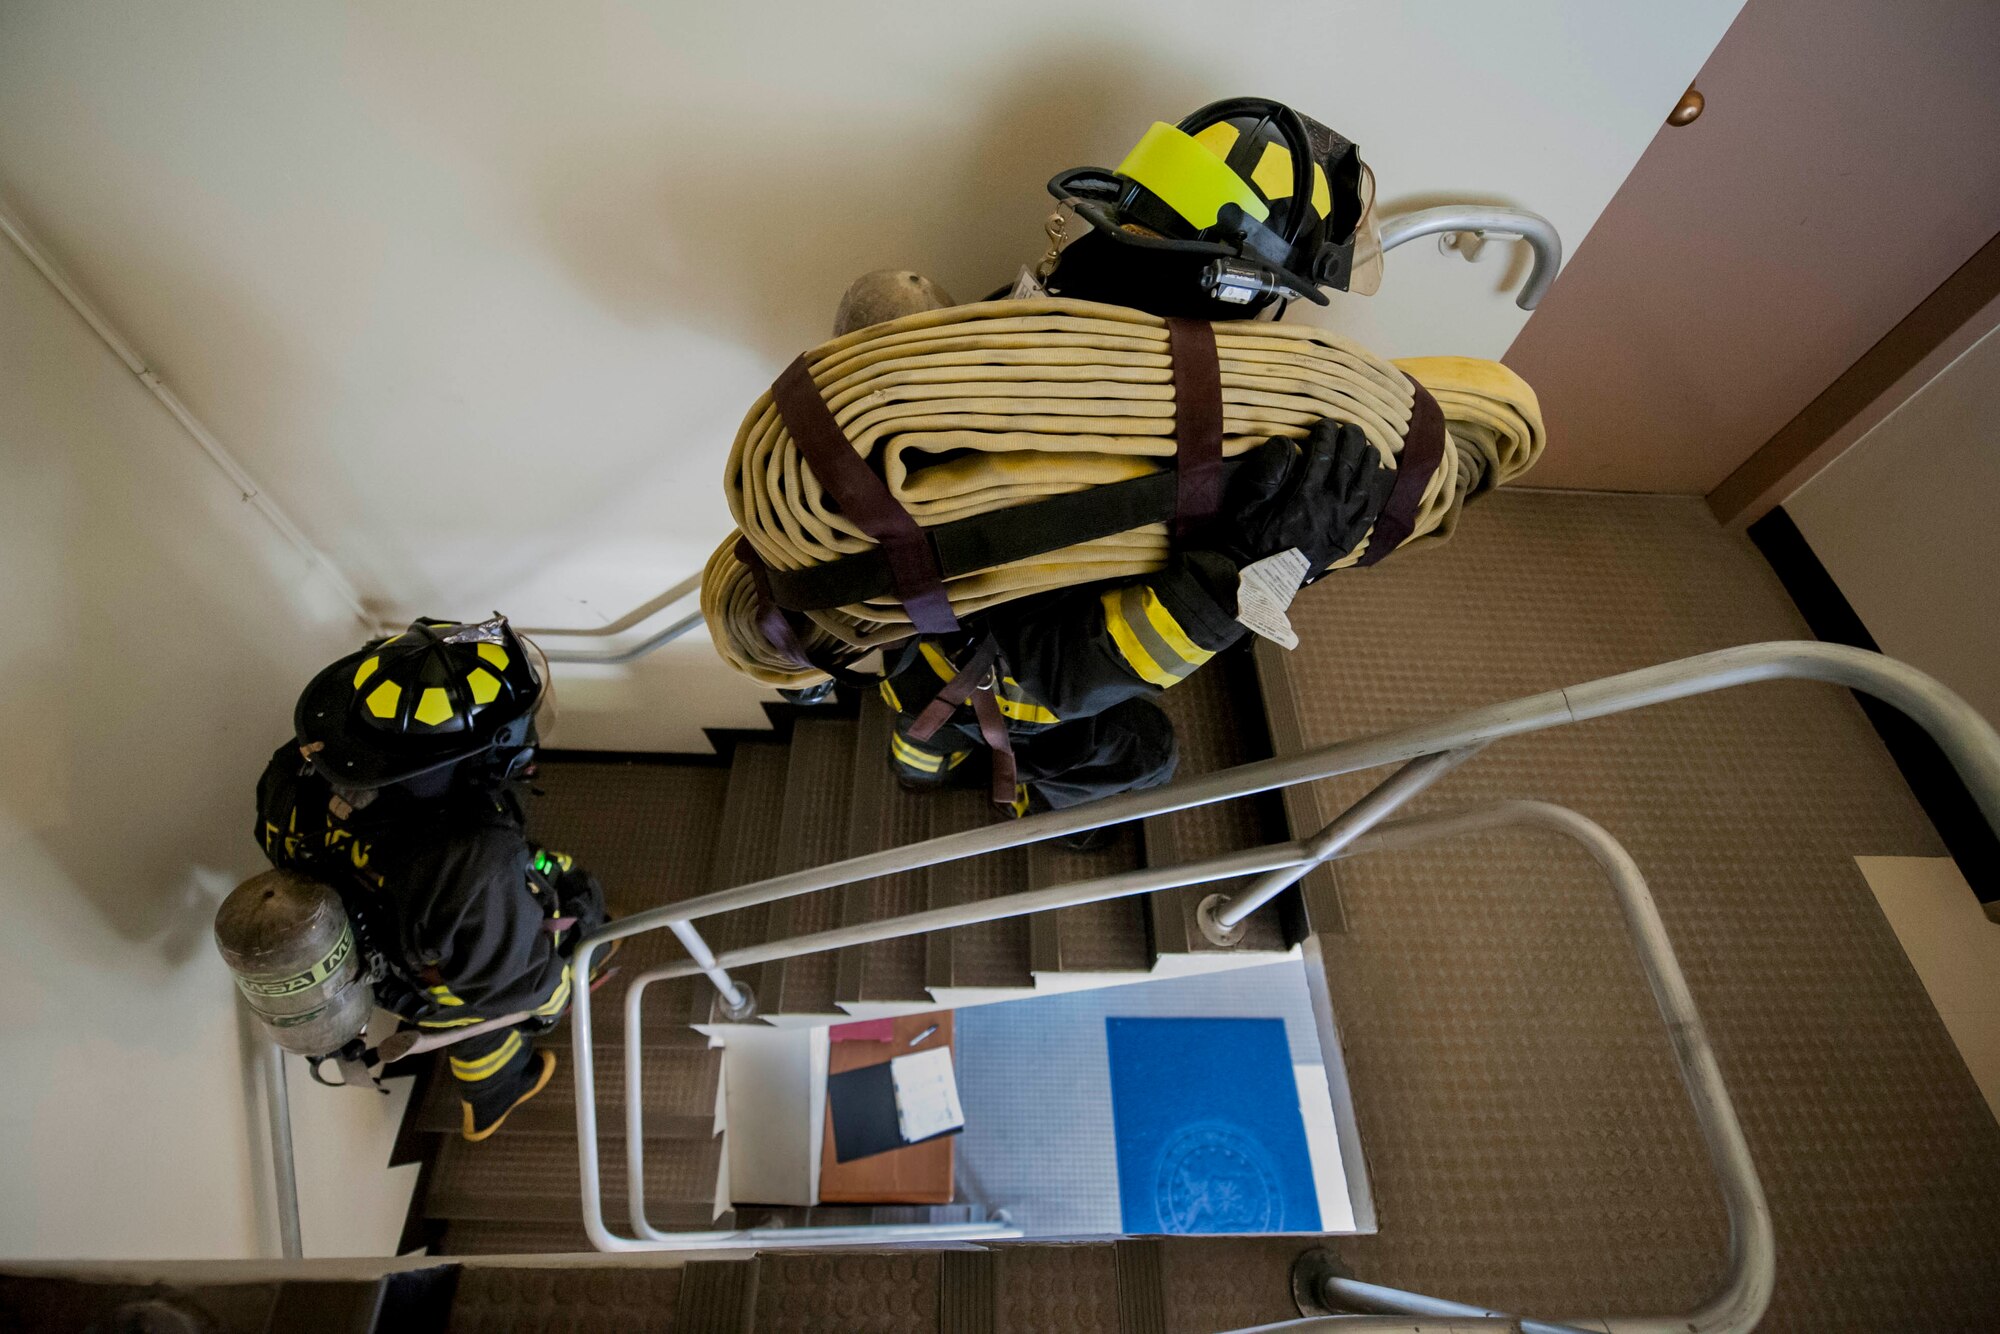 Yoshimi Sakurai and Senior Airman Brandon Hudson, 18th Civil Engineer Squadron firefighters, ascend a stairwell during a tower evacuation drill Aug. 15, 2016, at Kadena Air Base, Japan. Sakurai and Hudson carried hoses and tools up 13 flights of stairs to reach the top where simulated victims needed to be evacuated and carried out to safety. (U.S. Air Force photo by Senior Airman Peter Reft)